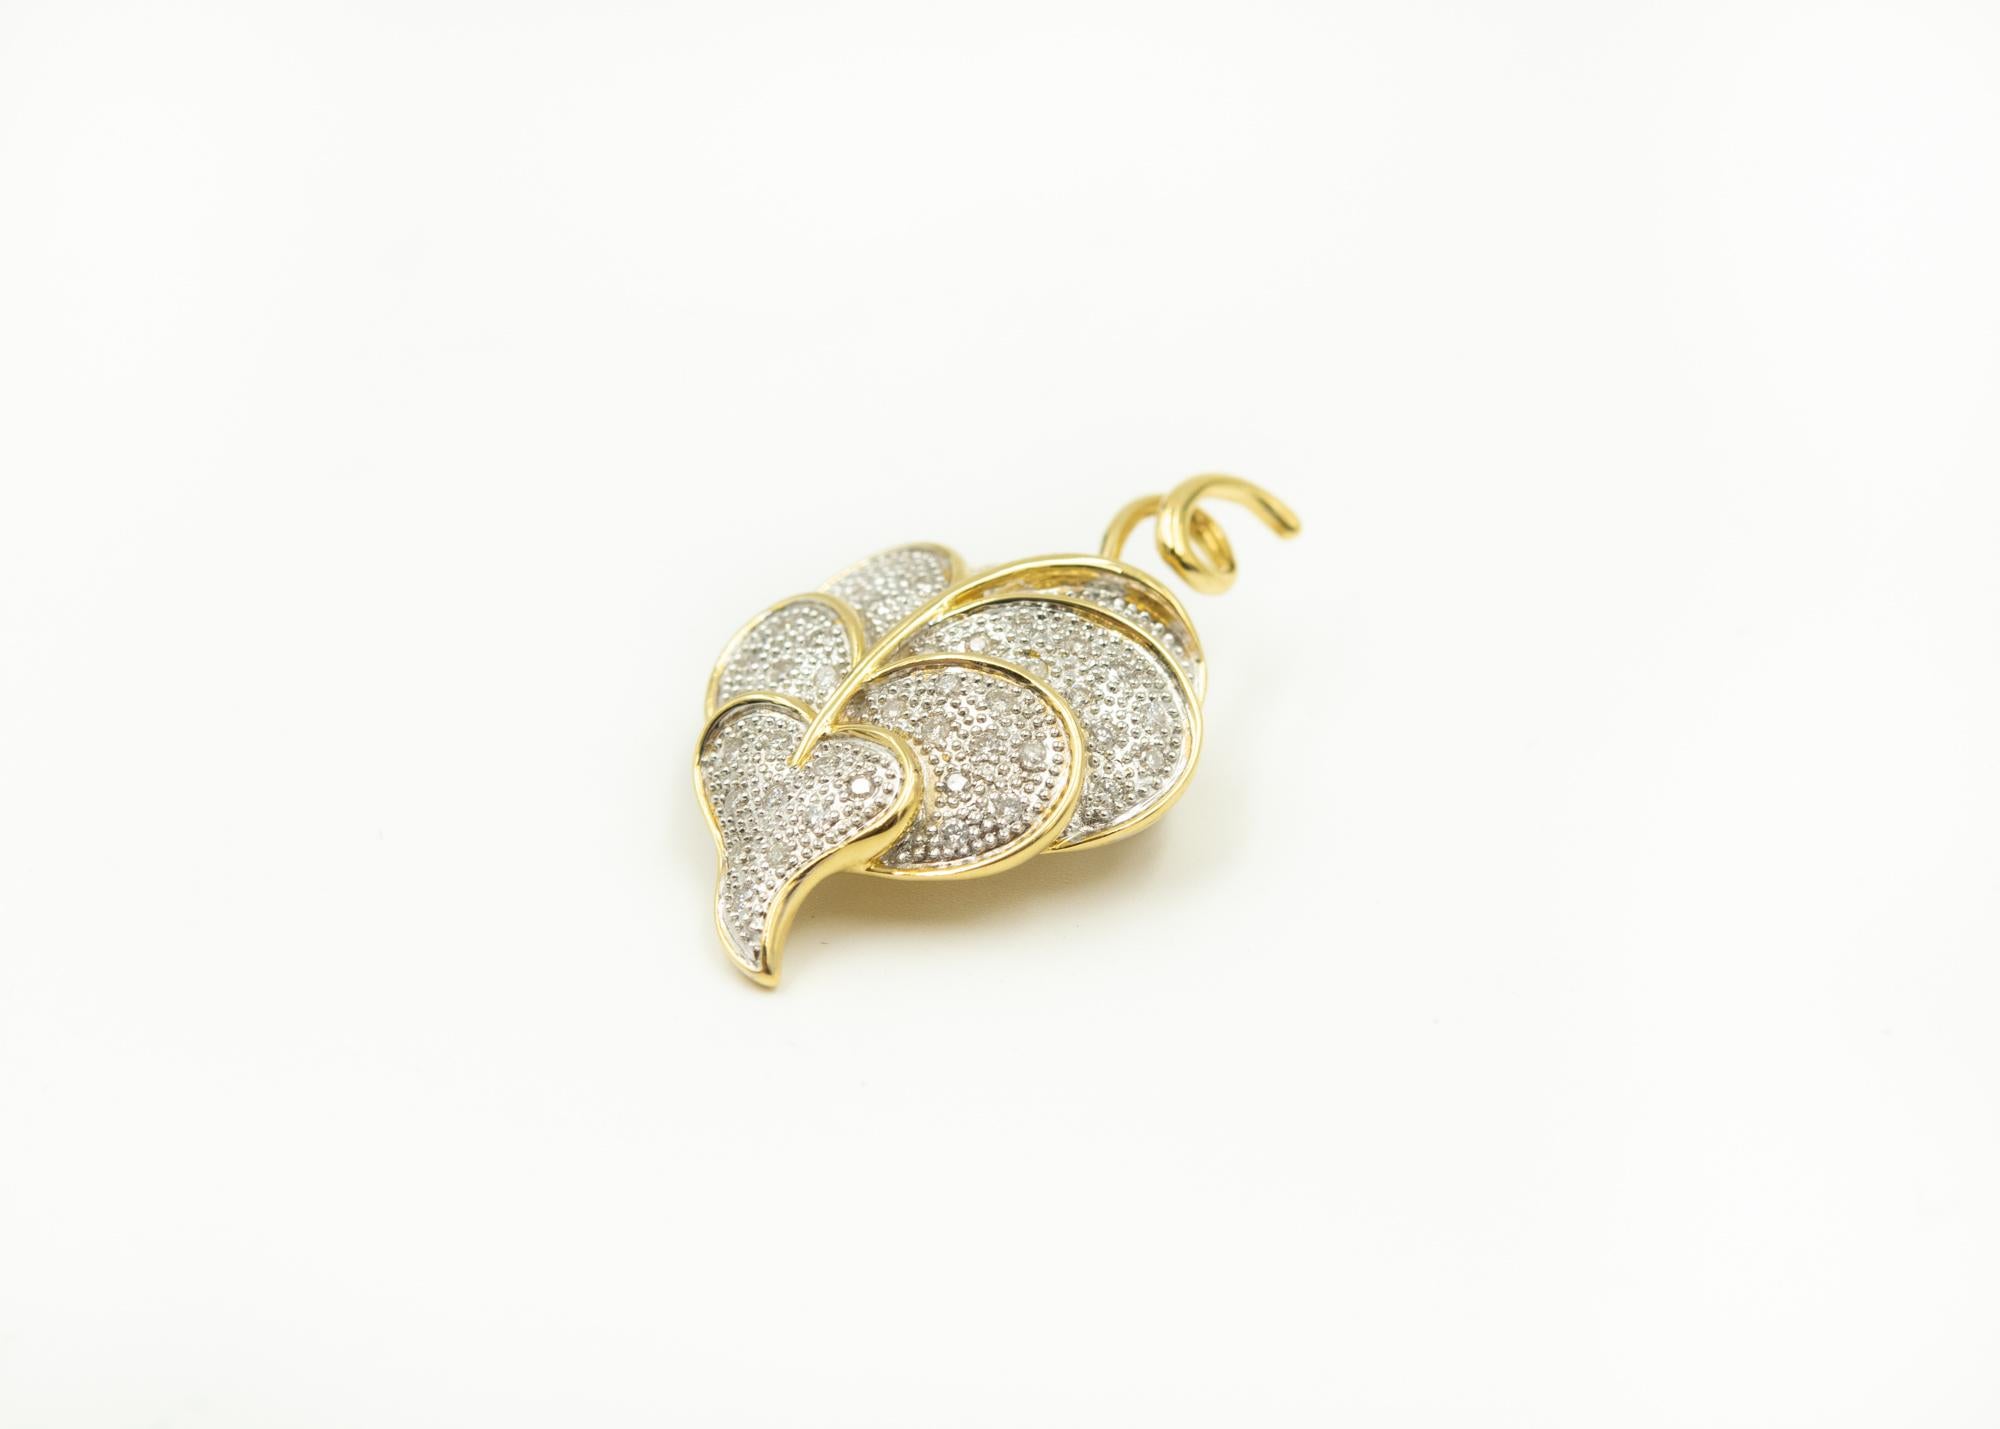 Stylized Diamond Yellow and White Gold Leaf Brooch Pendant For Sale 1